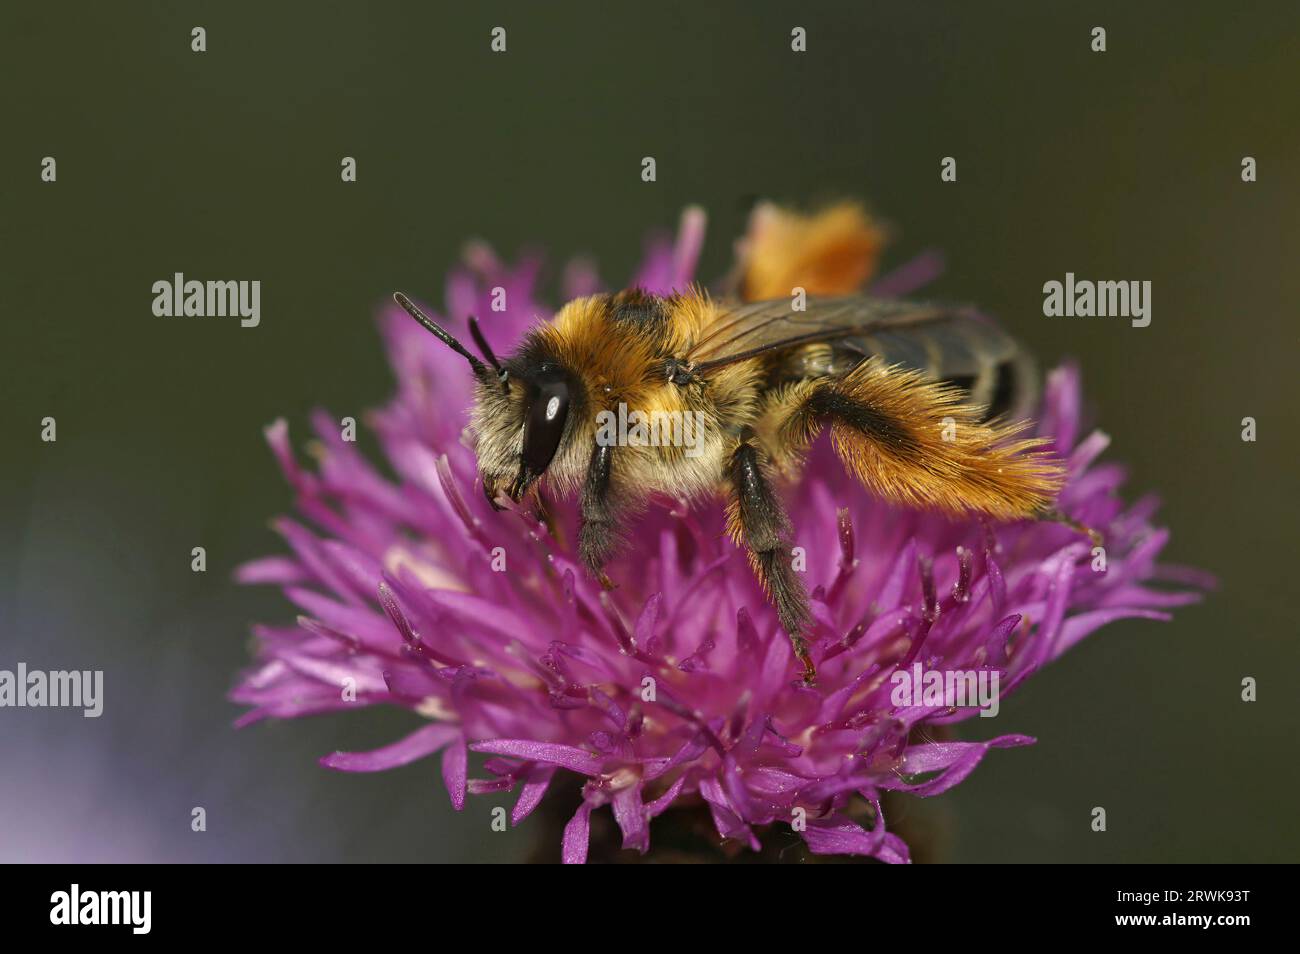 Natural closeup on a fluffy male Pantaloon bee, Dasypoda hirtipes, sitting on a yellow flower Stock Photo